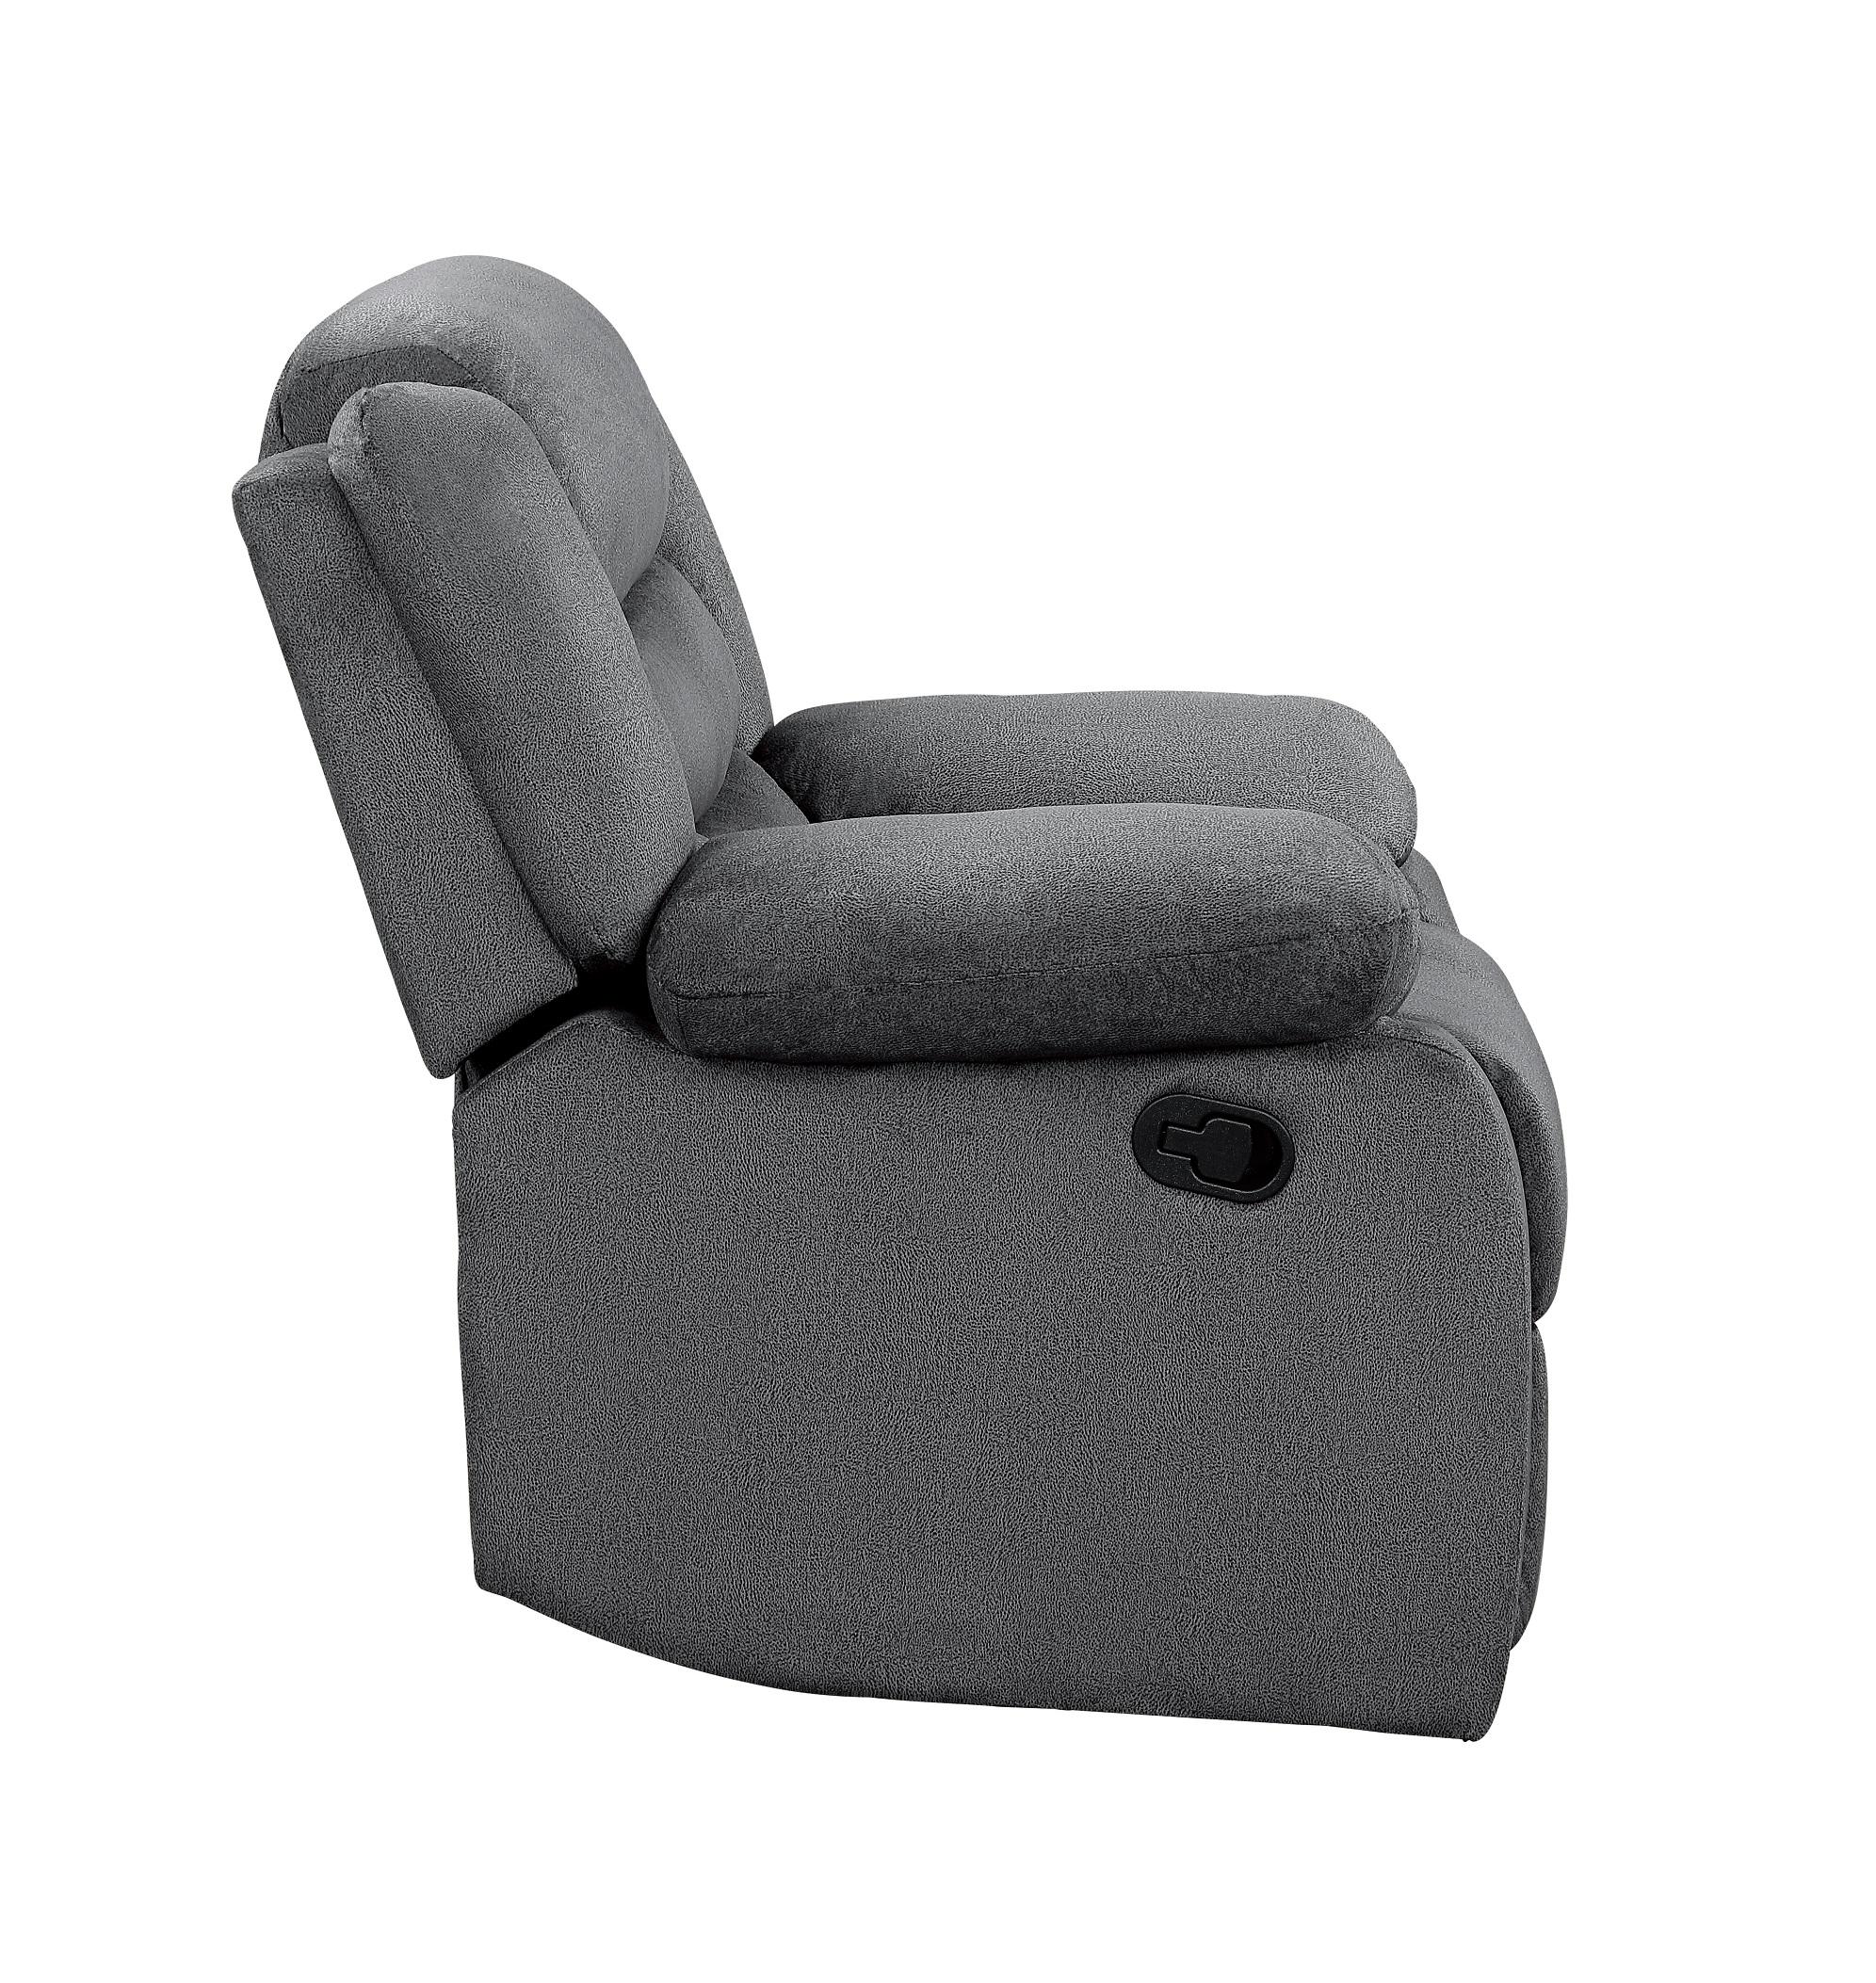 

    
Homelegance 9526GY-1 Discus Reclining Chair Gray 9526GY-1
